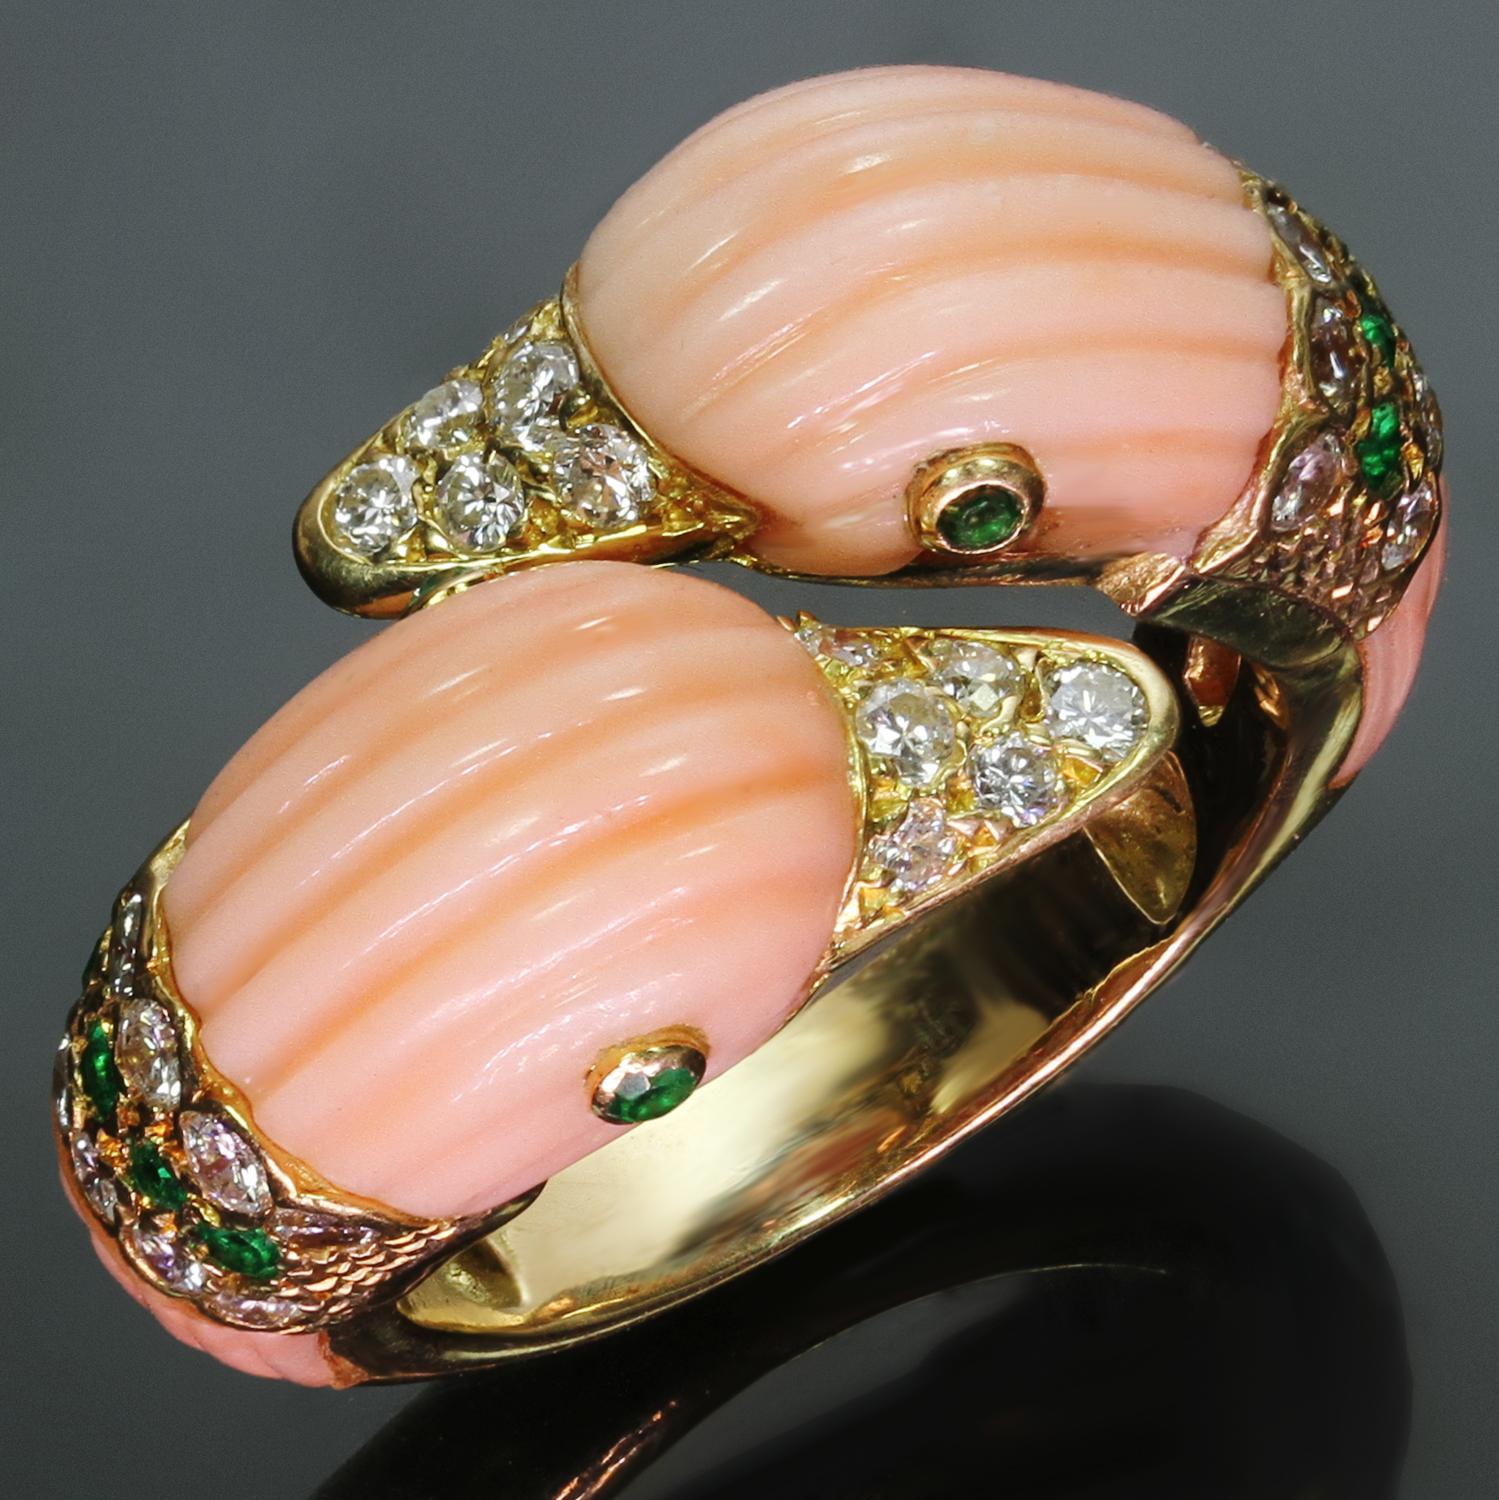 This fantastic vintage Van Cleef & Arpels bypass ring is crafted in 18k yellow gold and features a pair of carved fluted pink coral dolphins accented round-cut green emerald and 32 brilliant-cut round F-G-H VS1-VS2 diamonds. Made in France circa